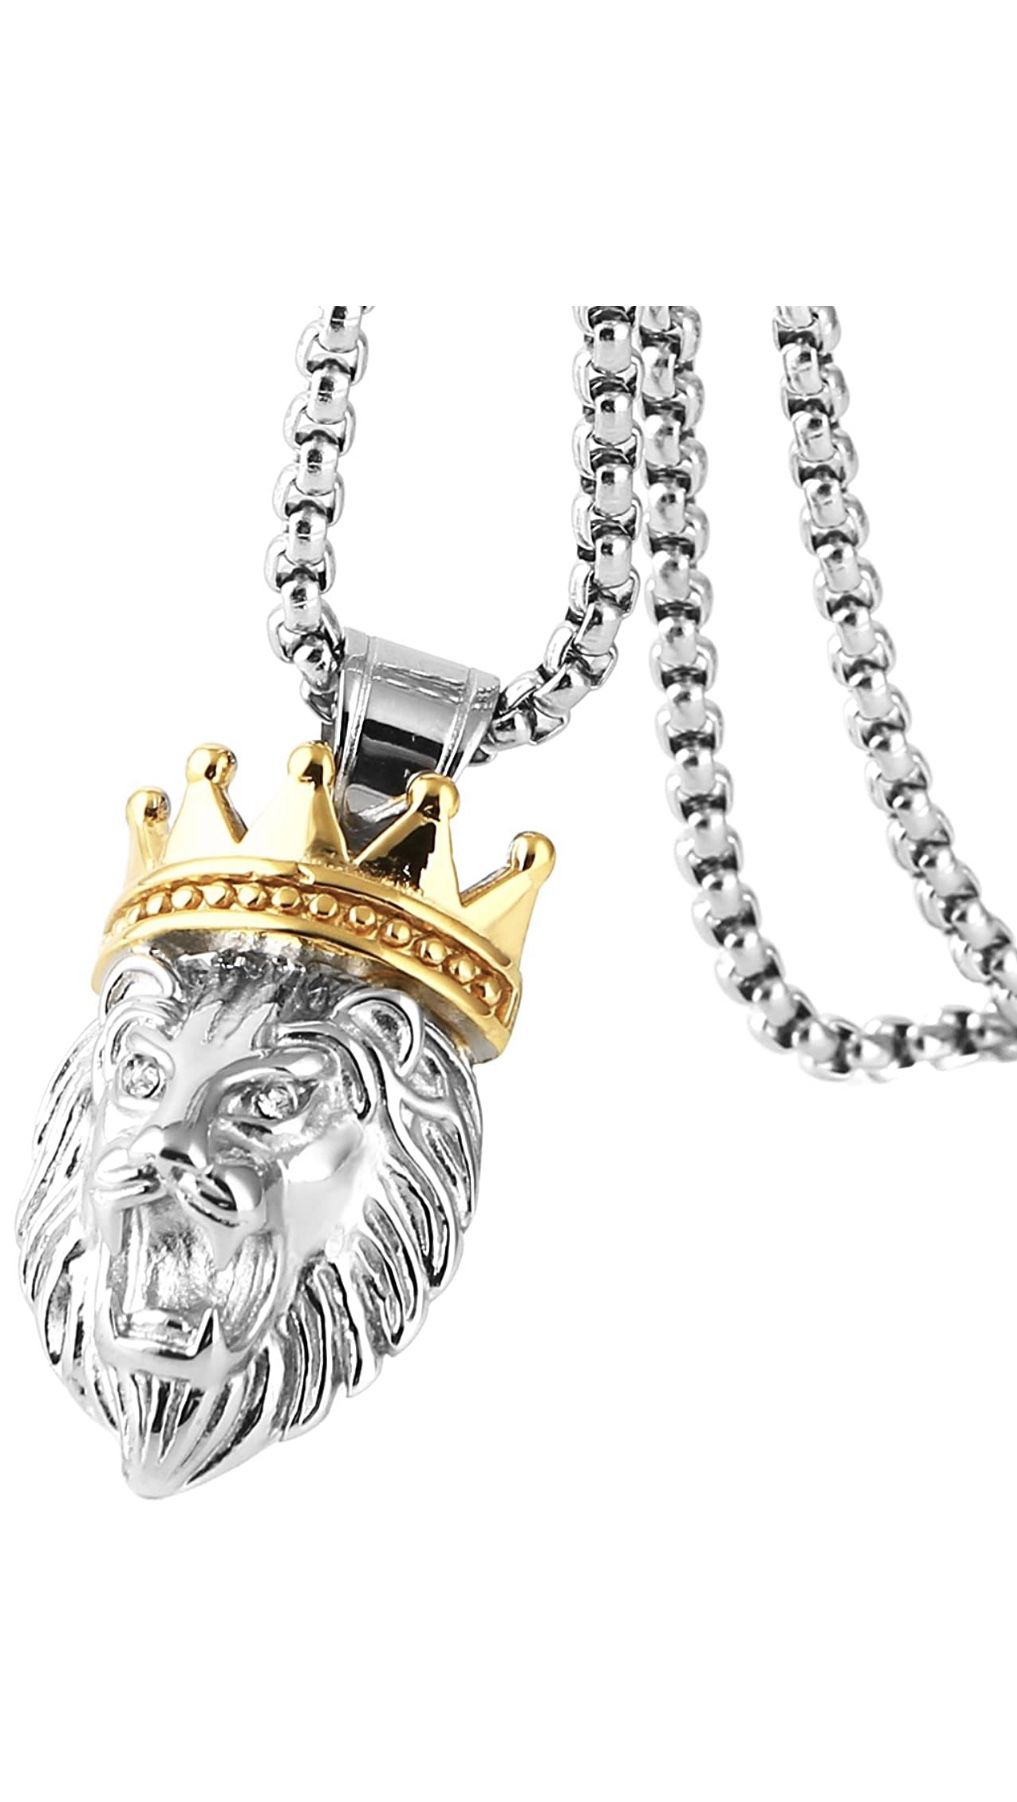 Lion King Pendant Necklace Cable Wheat 22” Chain Men's Silver Gold Tone Stainless Steel